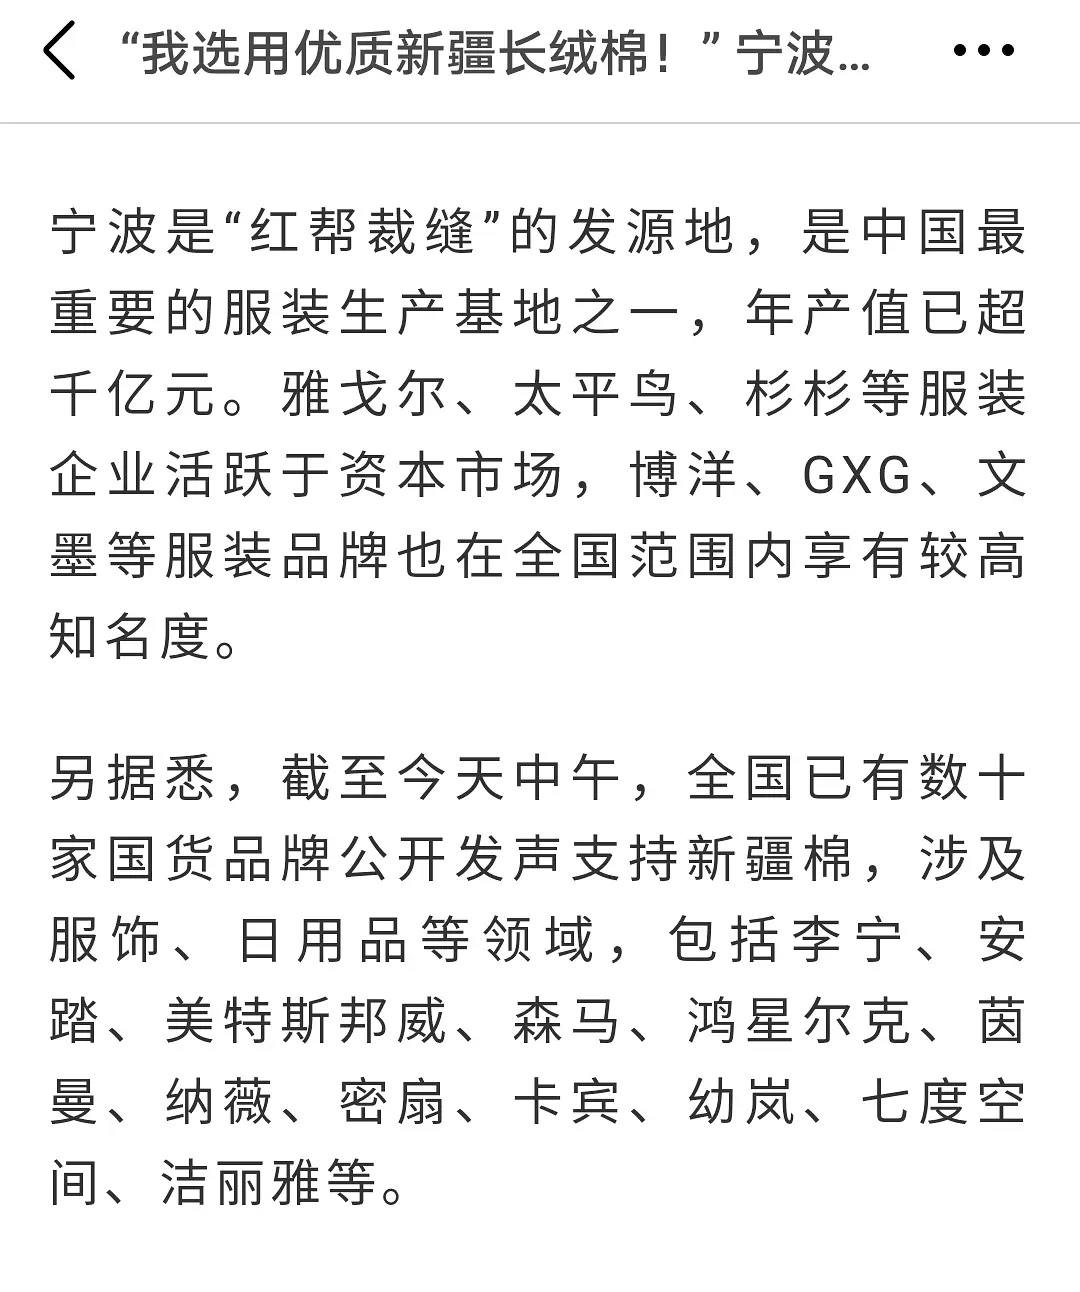 Tide of star end an agreement is follow-up: Brand share price drops greatly, BCI China area declares where one stands, 3 know Song cutout language